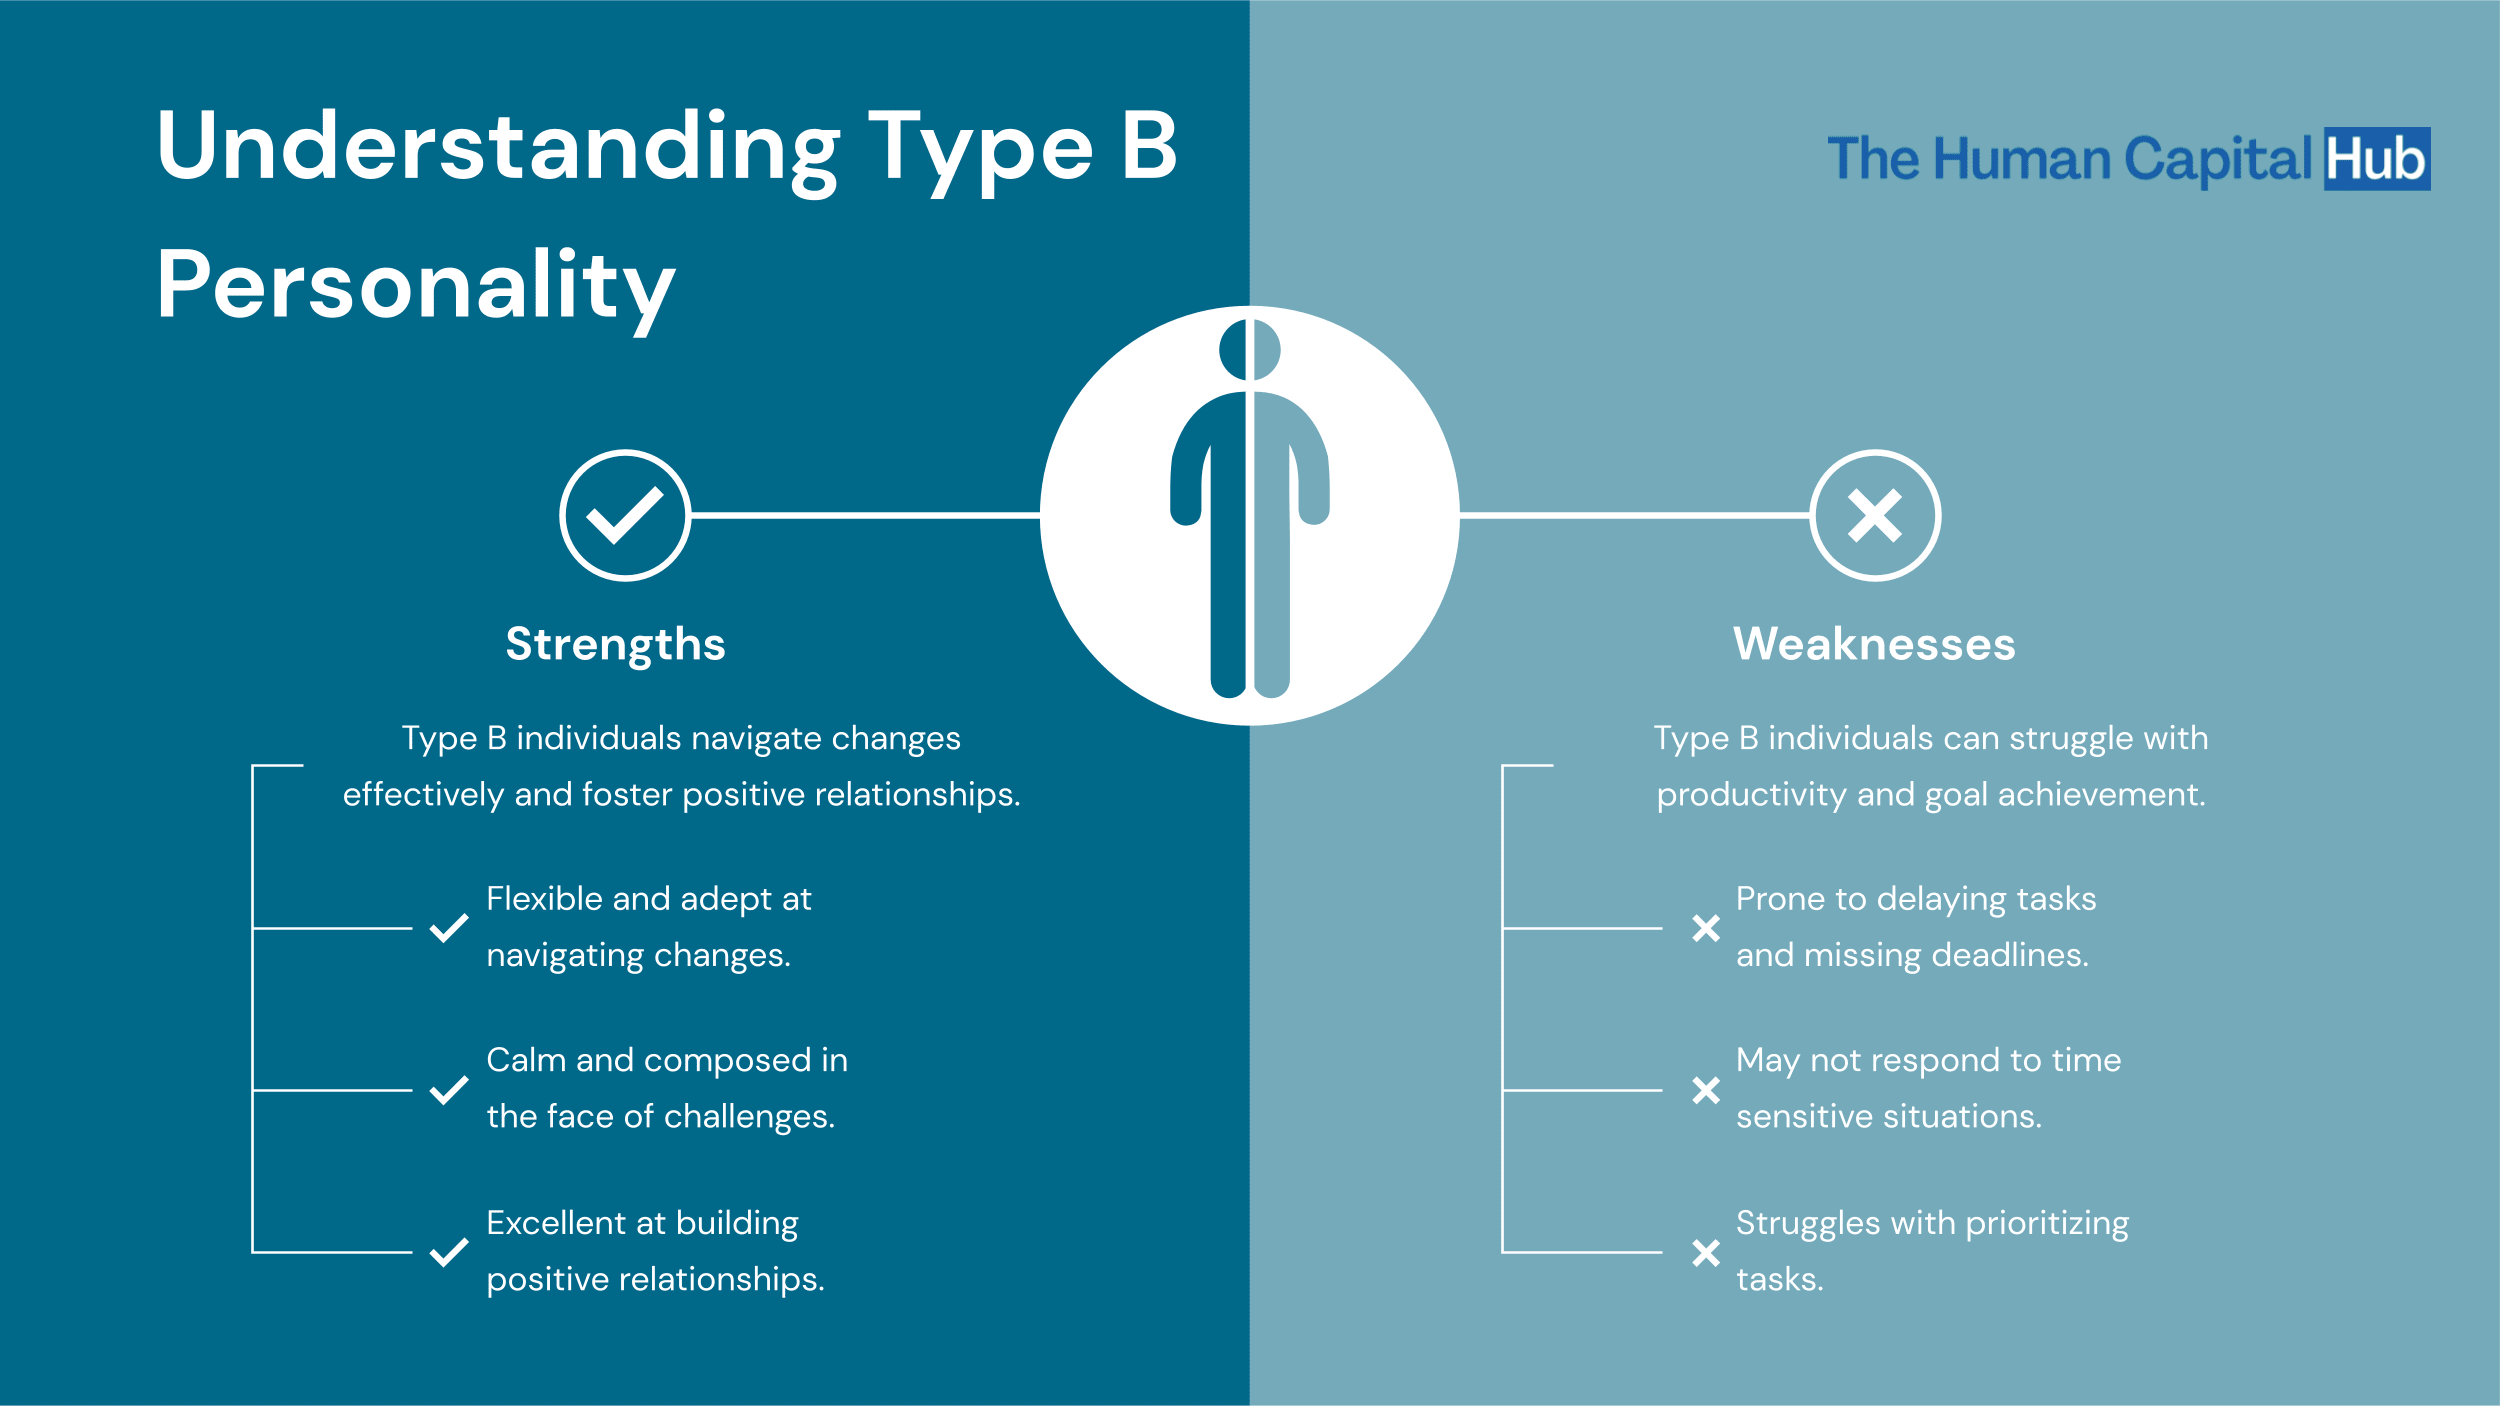 Type B Personality - What is it?